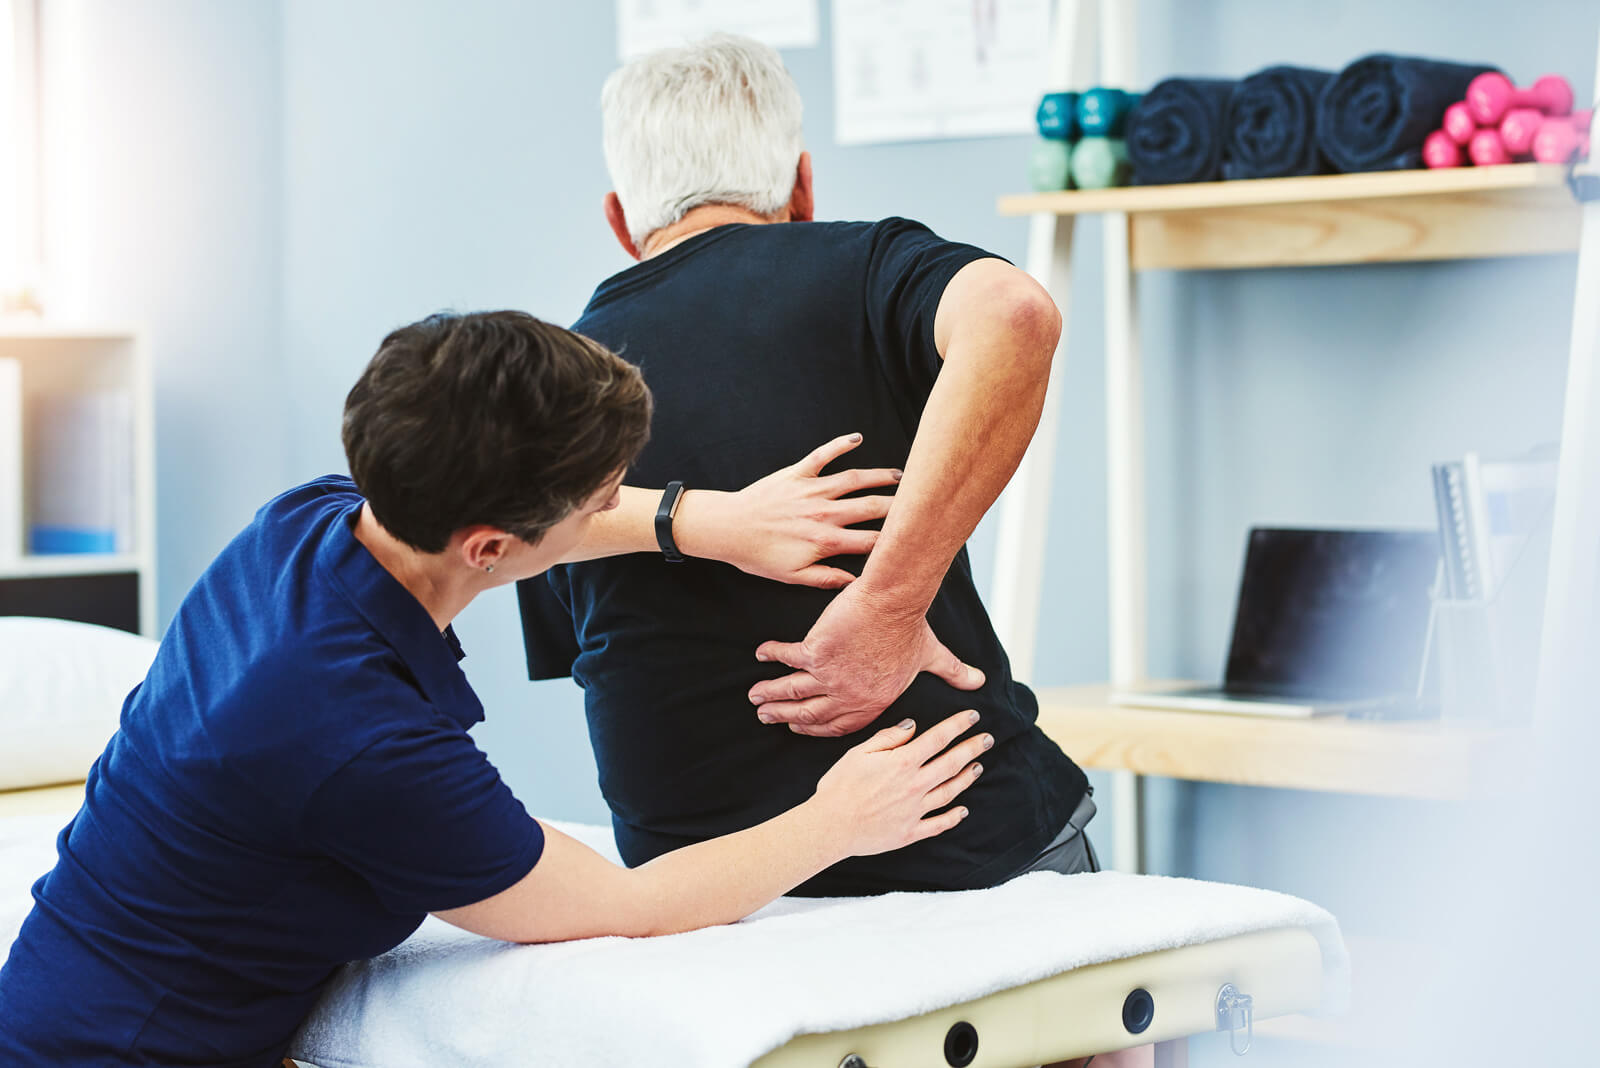 How Can Musculoskeletal Pain Be Treated?